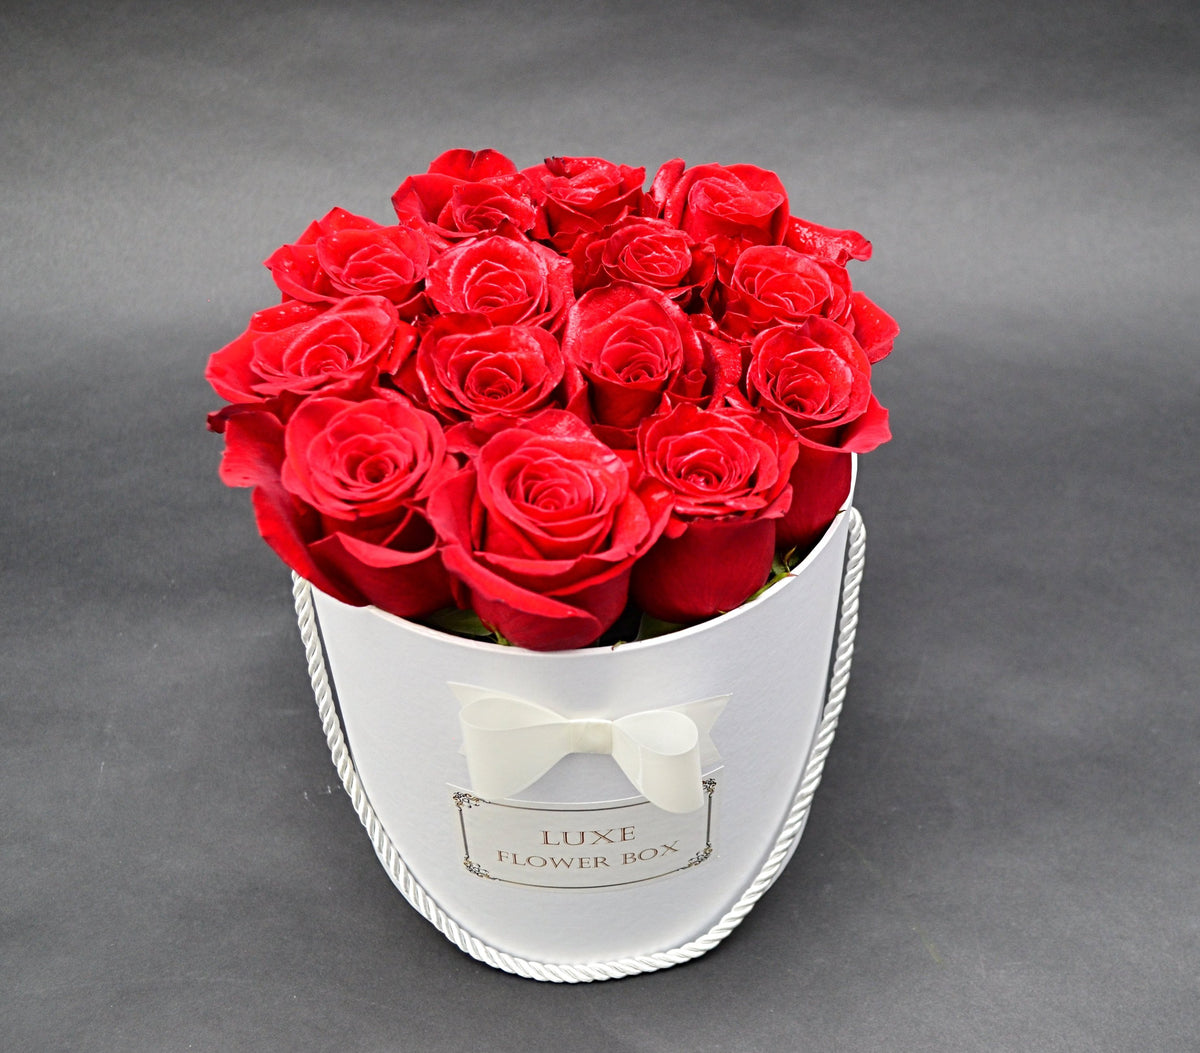 Valentine's Day "Helena" Roses in a box